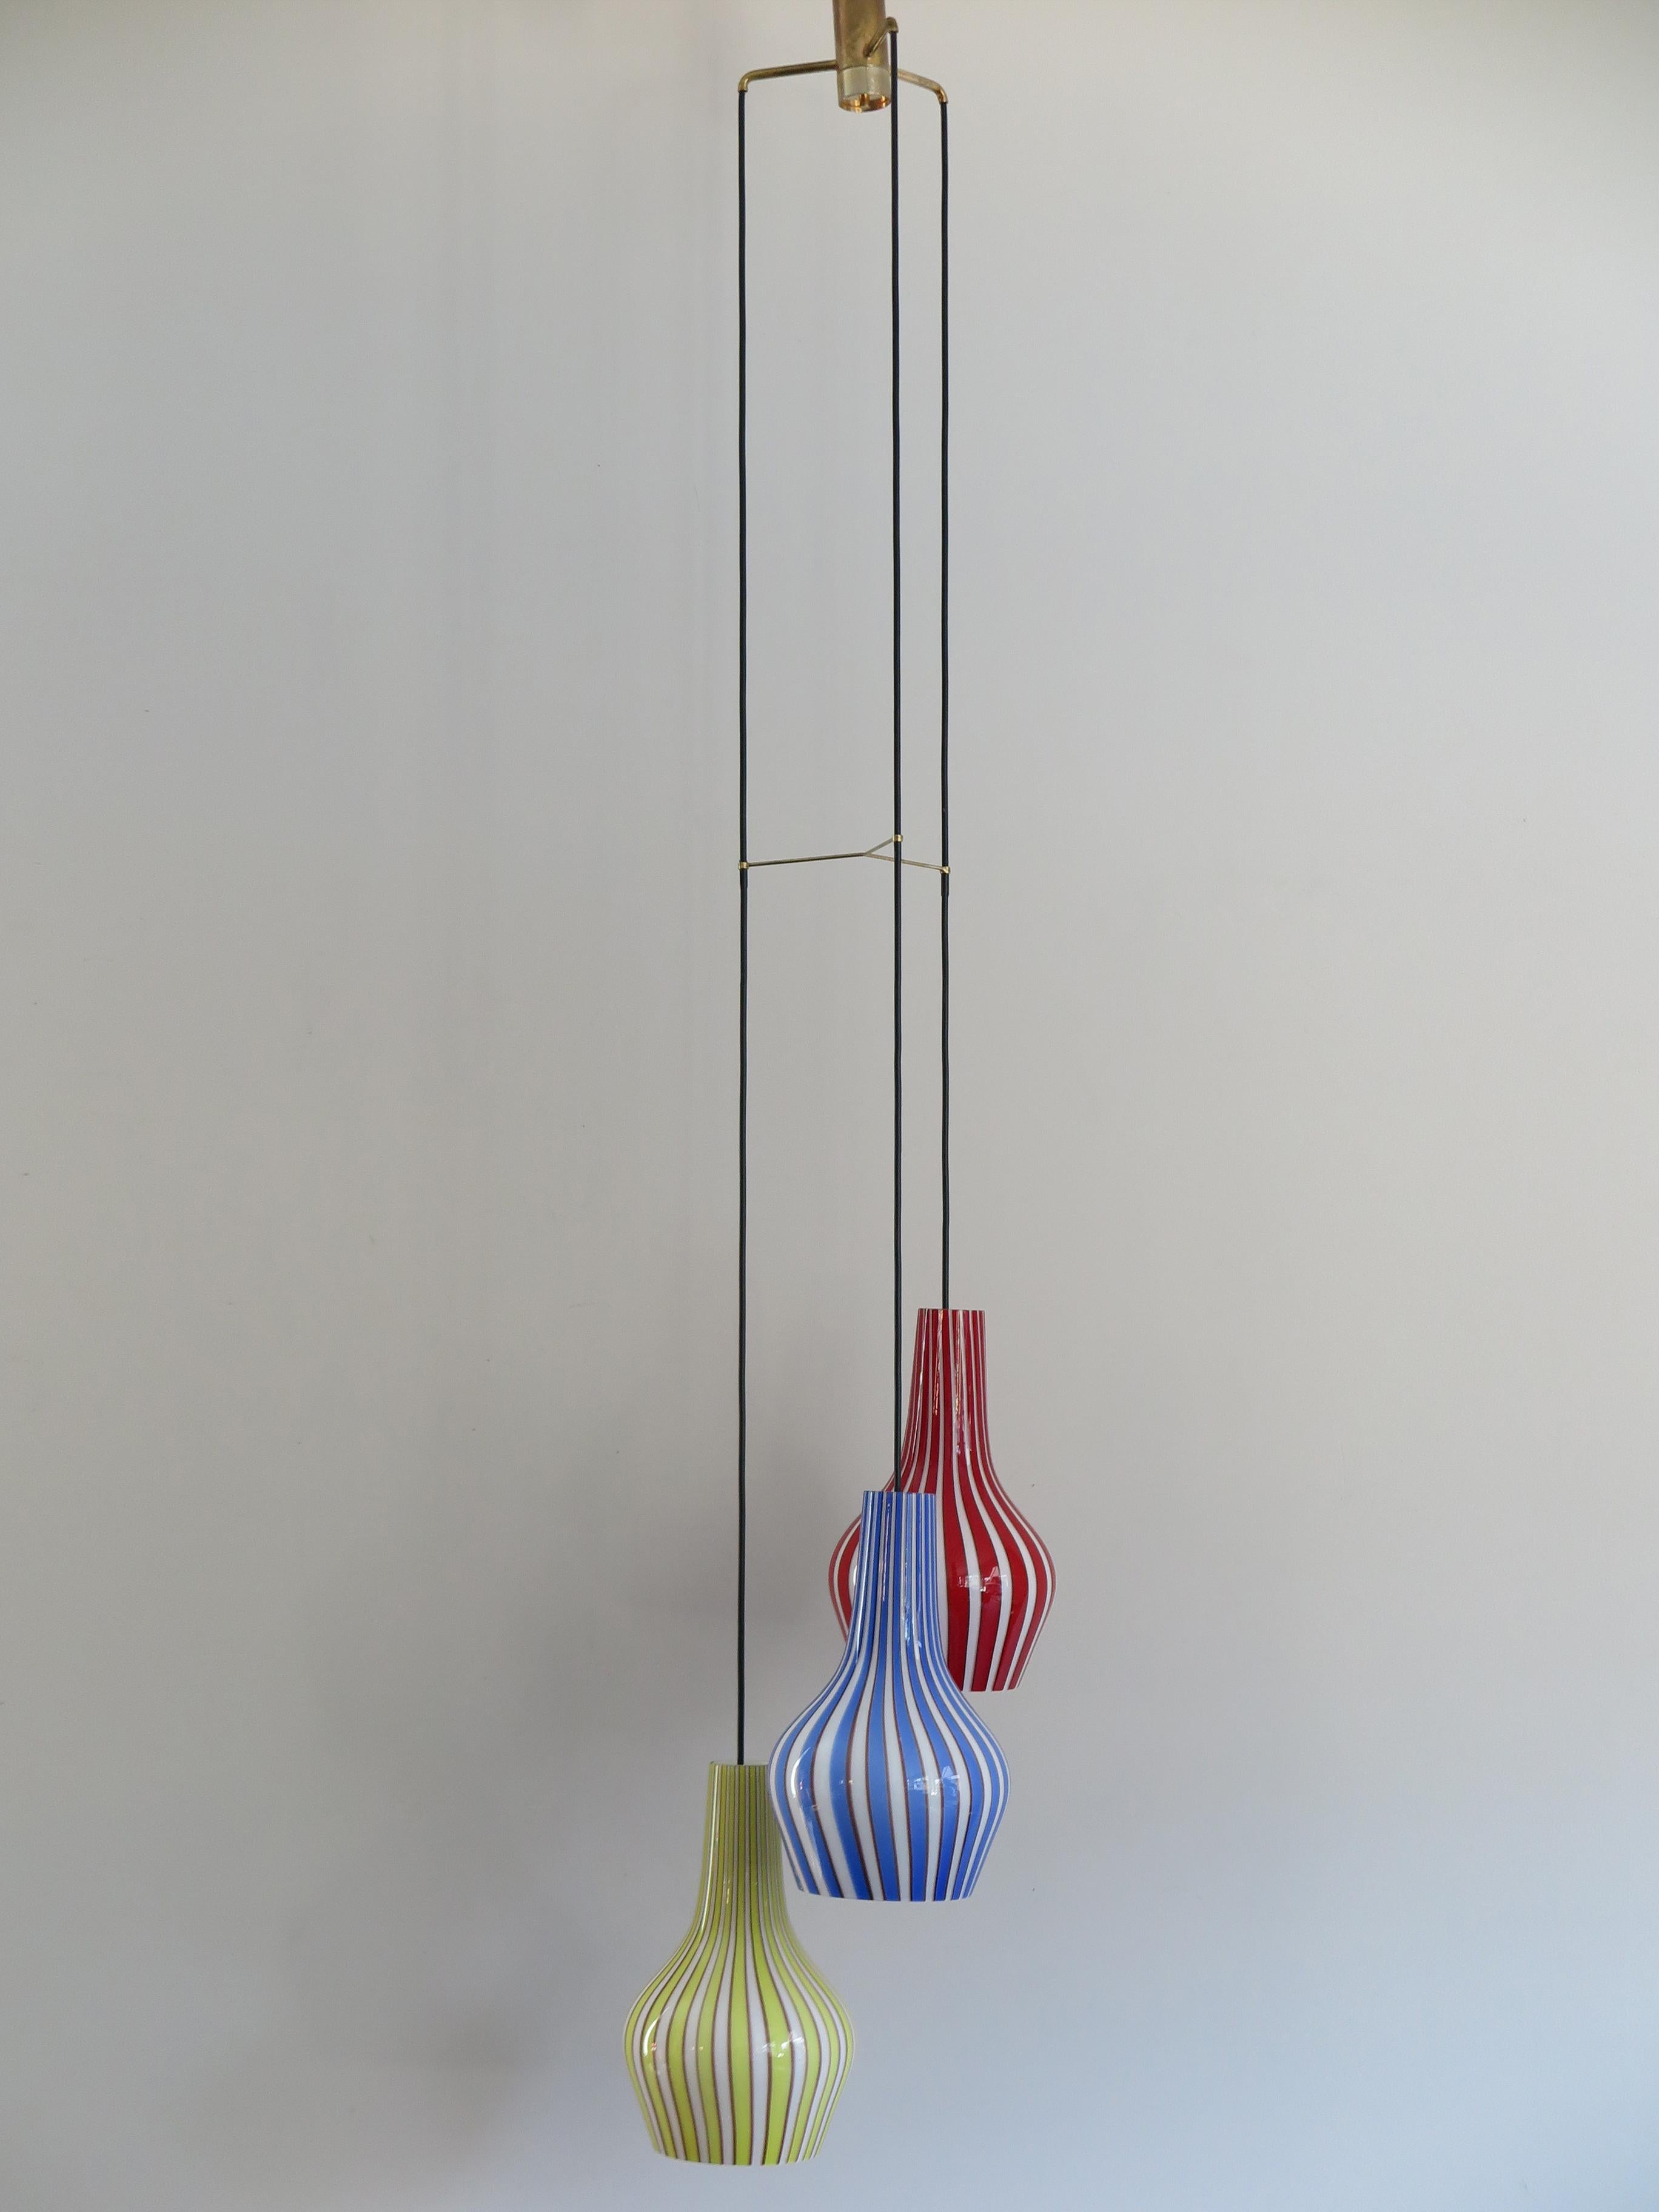 Tan France Auction Pick

Amazing and very rare Italian glass pendant lamp designed by Flavio Poli for Seguso Vetri d'Arte ‘Art glass’ with red, yellow and blue lined striped glass diffusers and with inner white casing, brass details, 1950s
29th